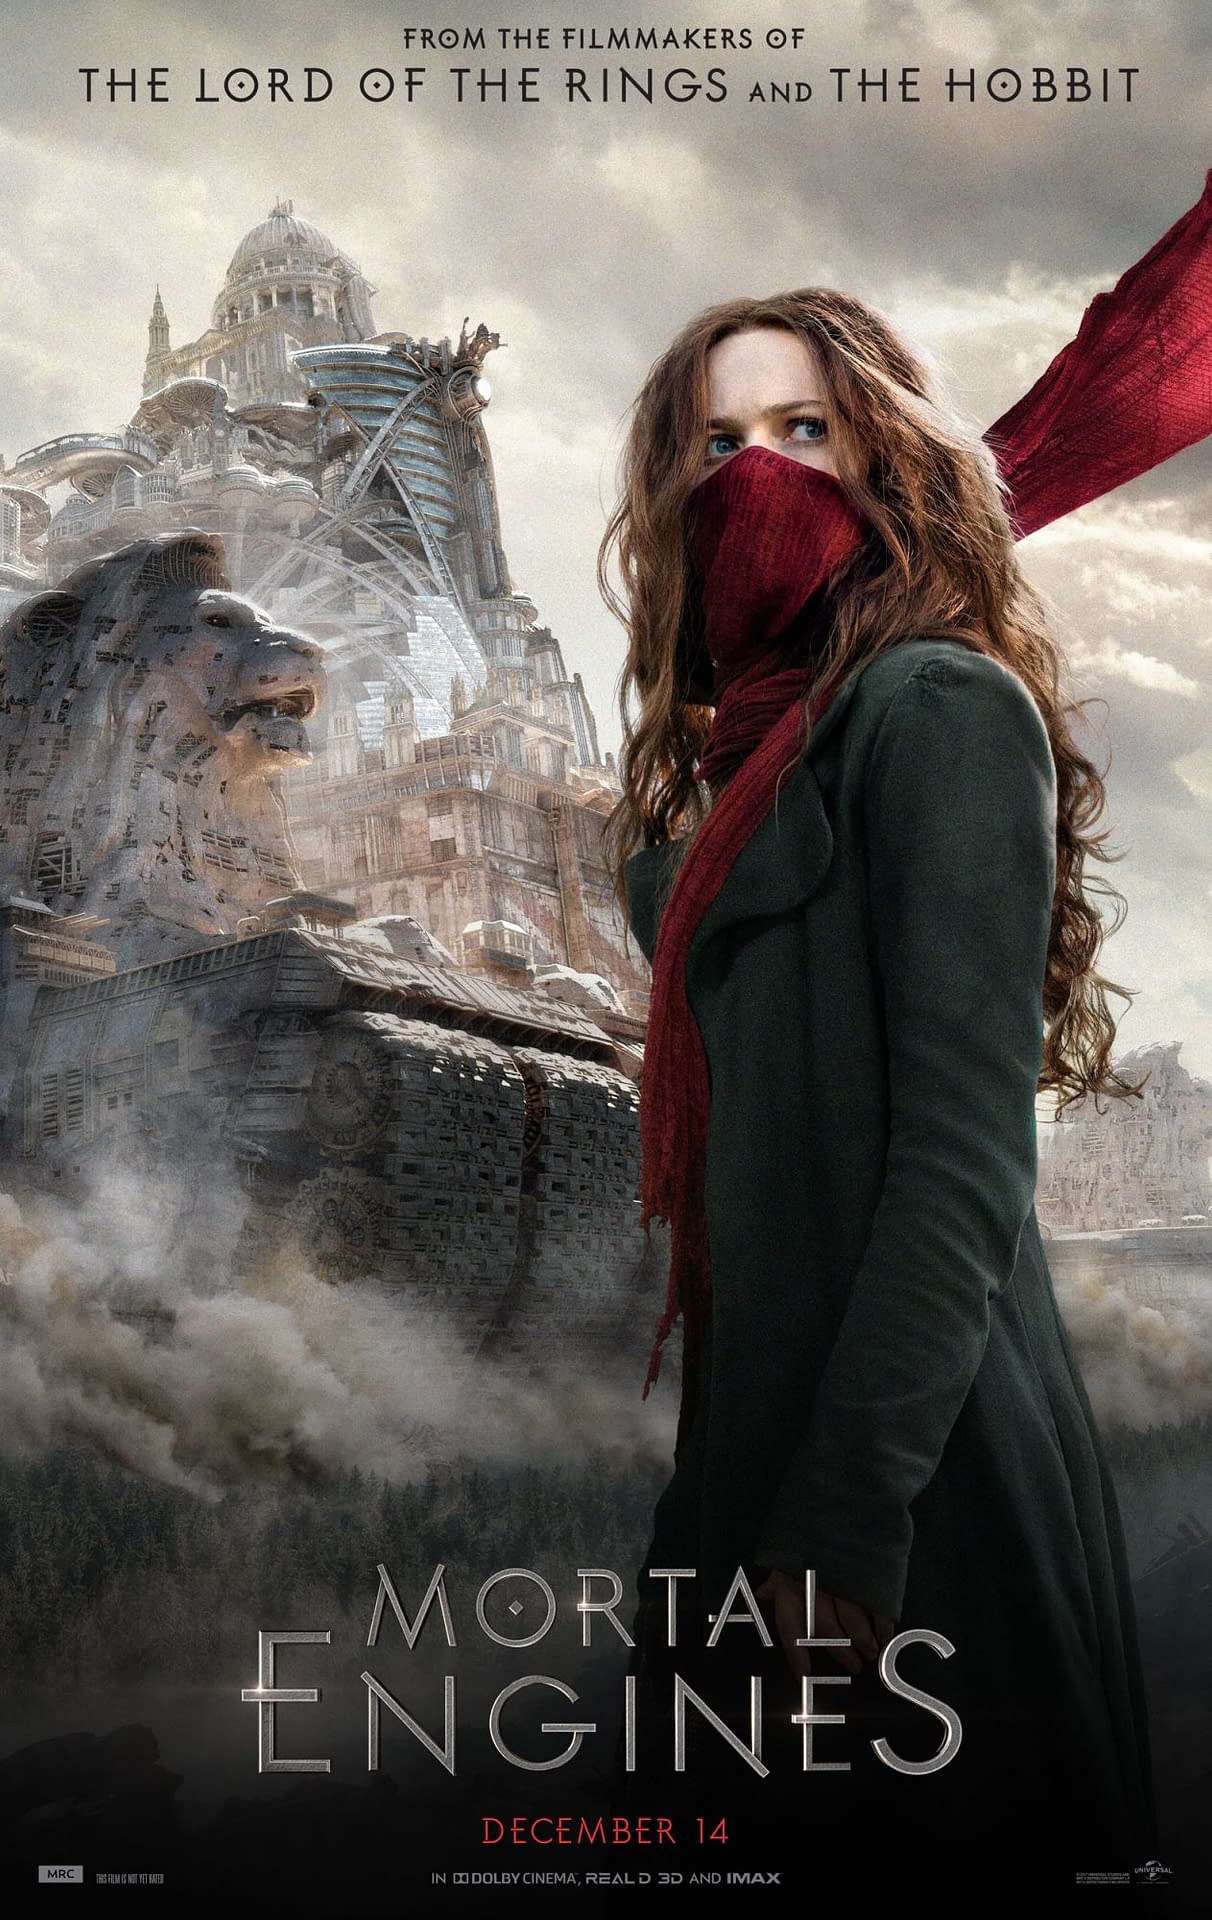 Mortal Engines: New Poster, Featurette, and London Welcomes You